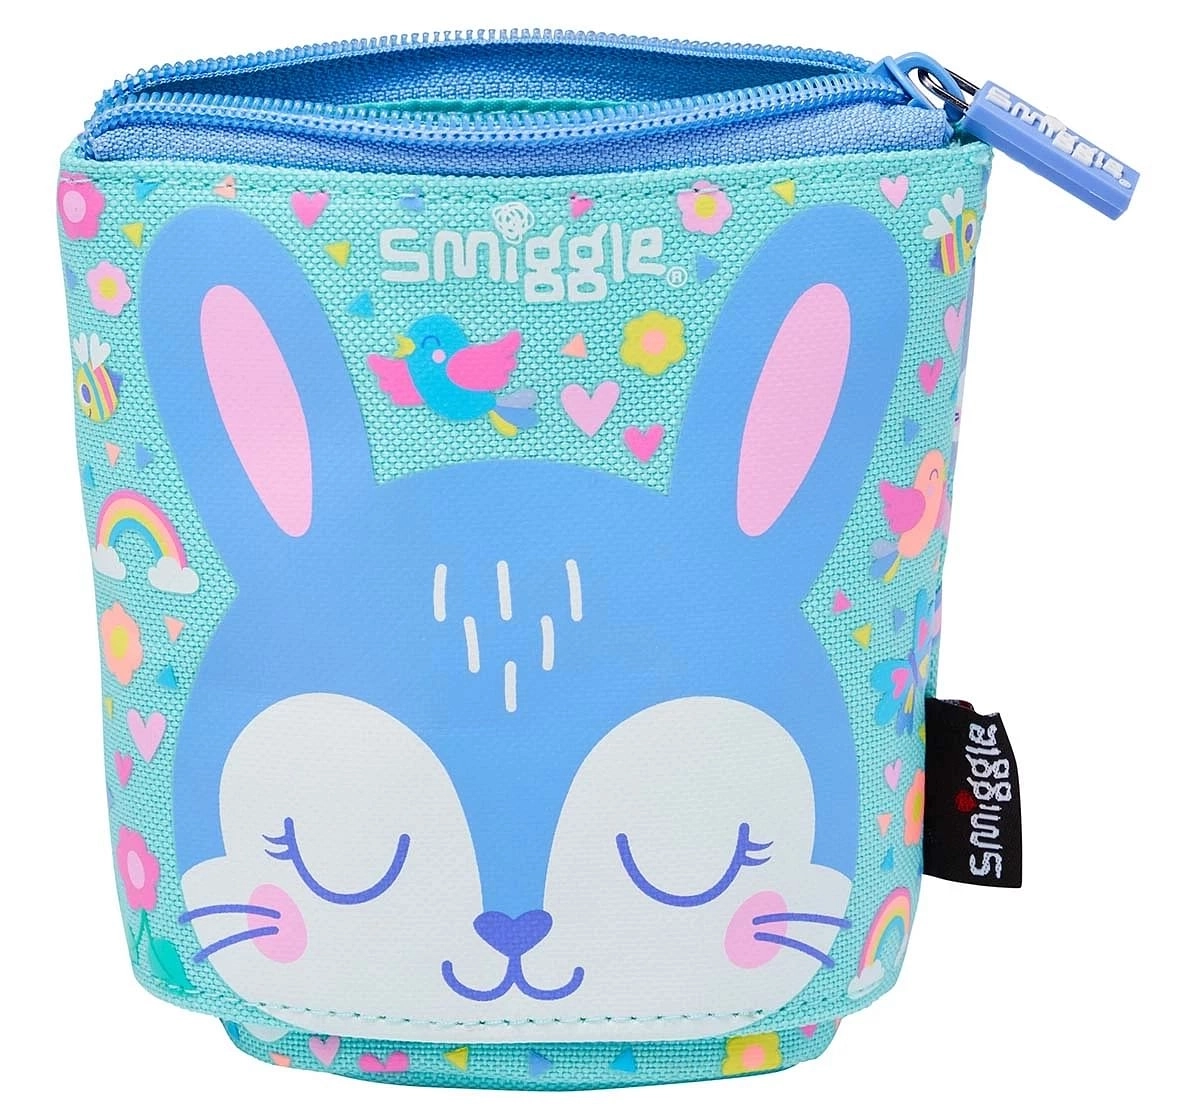 Smiggle Illusion Hardtop Pencil Case Pencil Box Pen Organiser School  Supplies with Zipped Compartments for Kids Above 3 Years of Age - Unicorn  Print : Amazon.in: Office Products